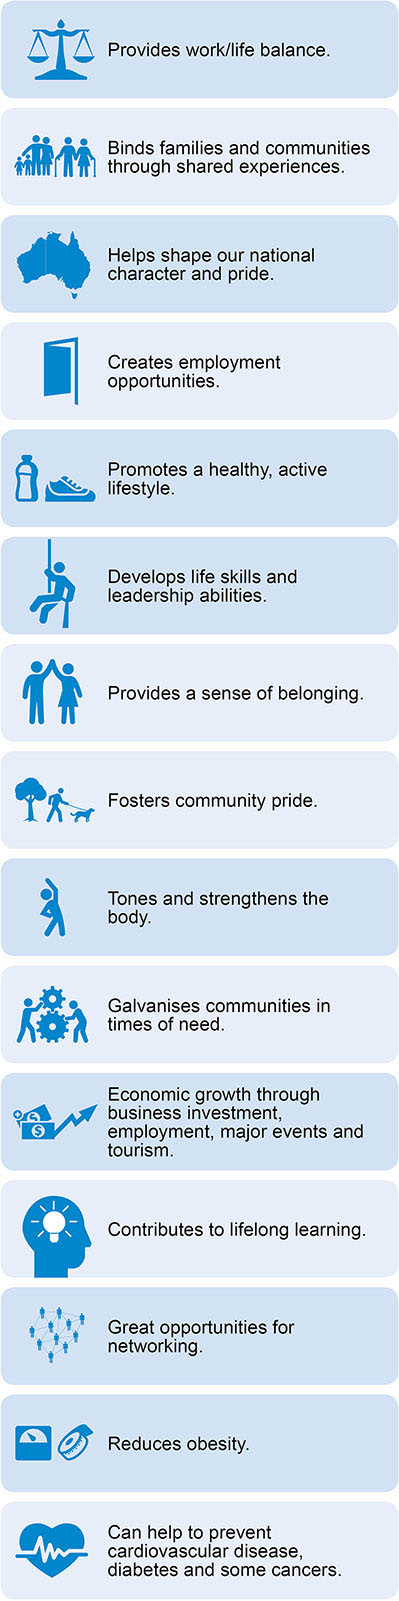 30 ways sport and recreation benefits people and communities (the first 15)